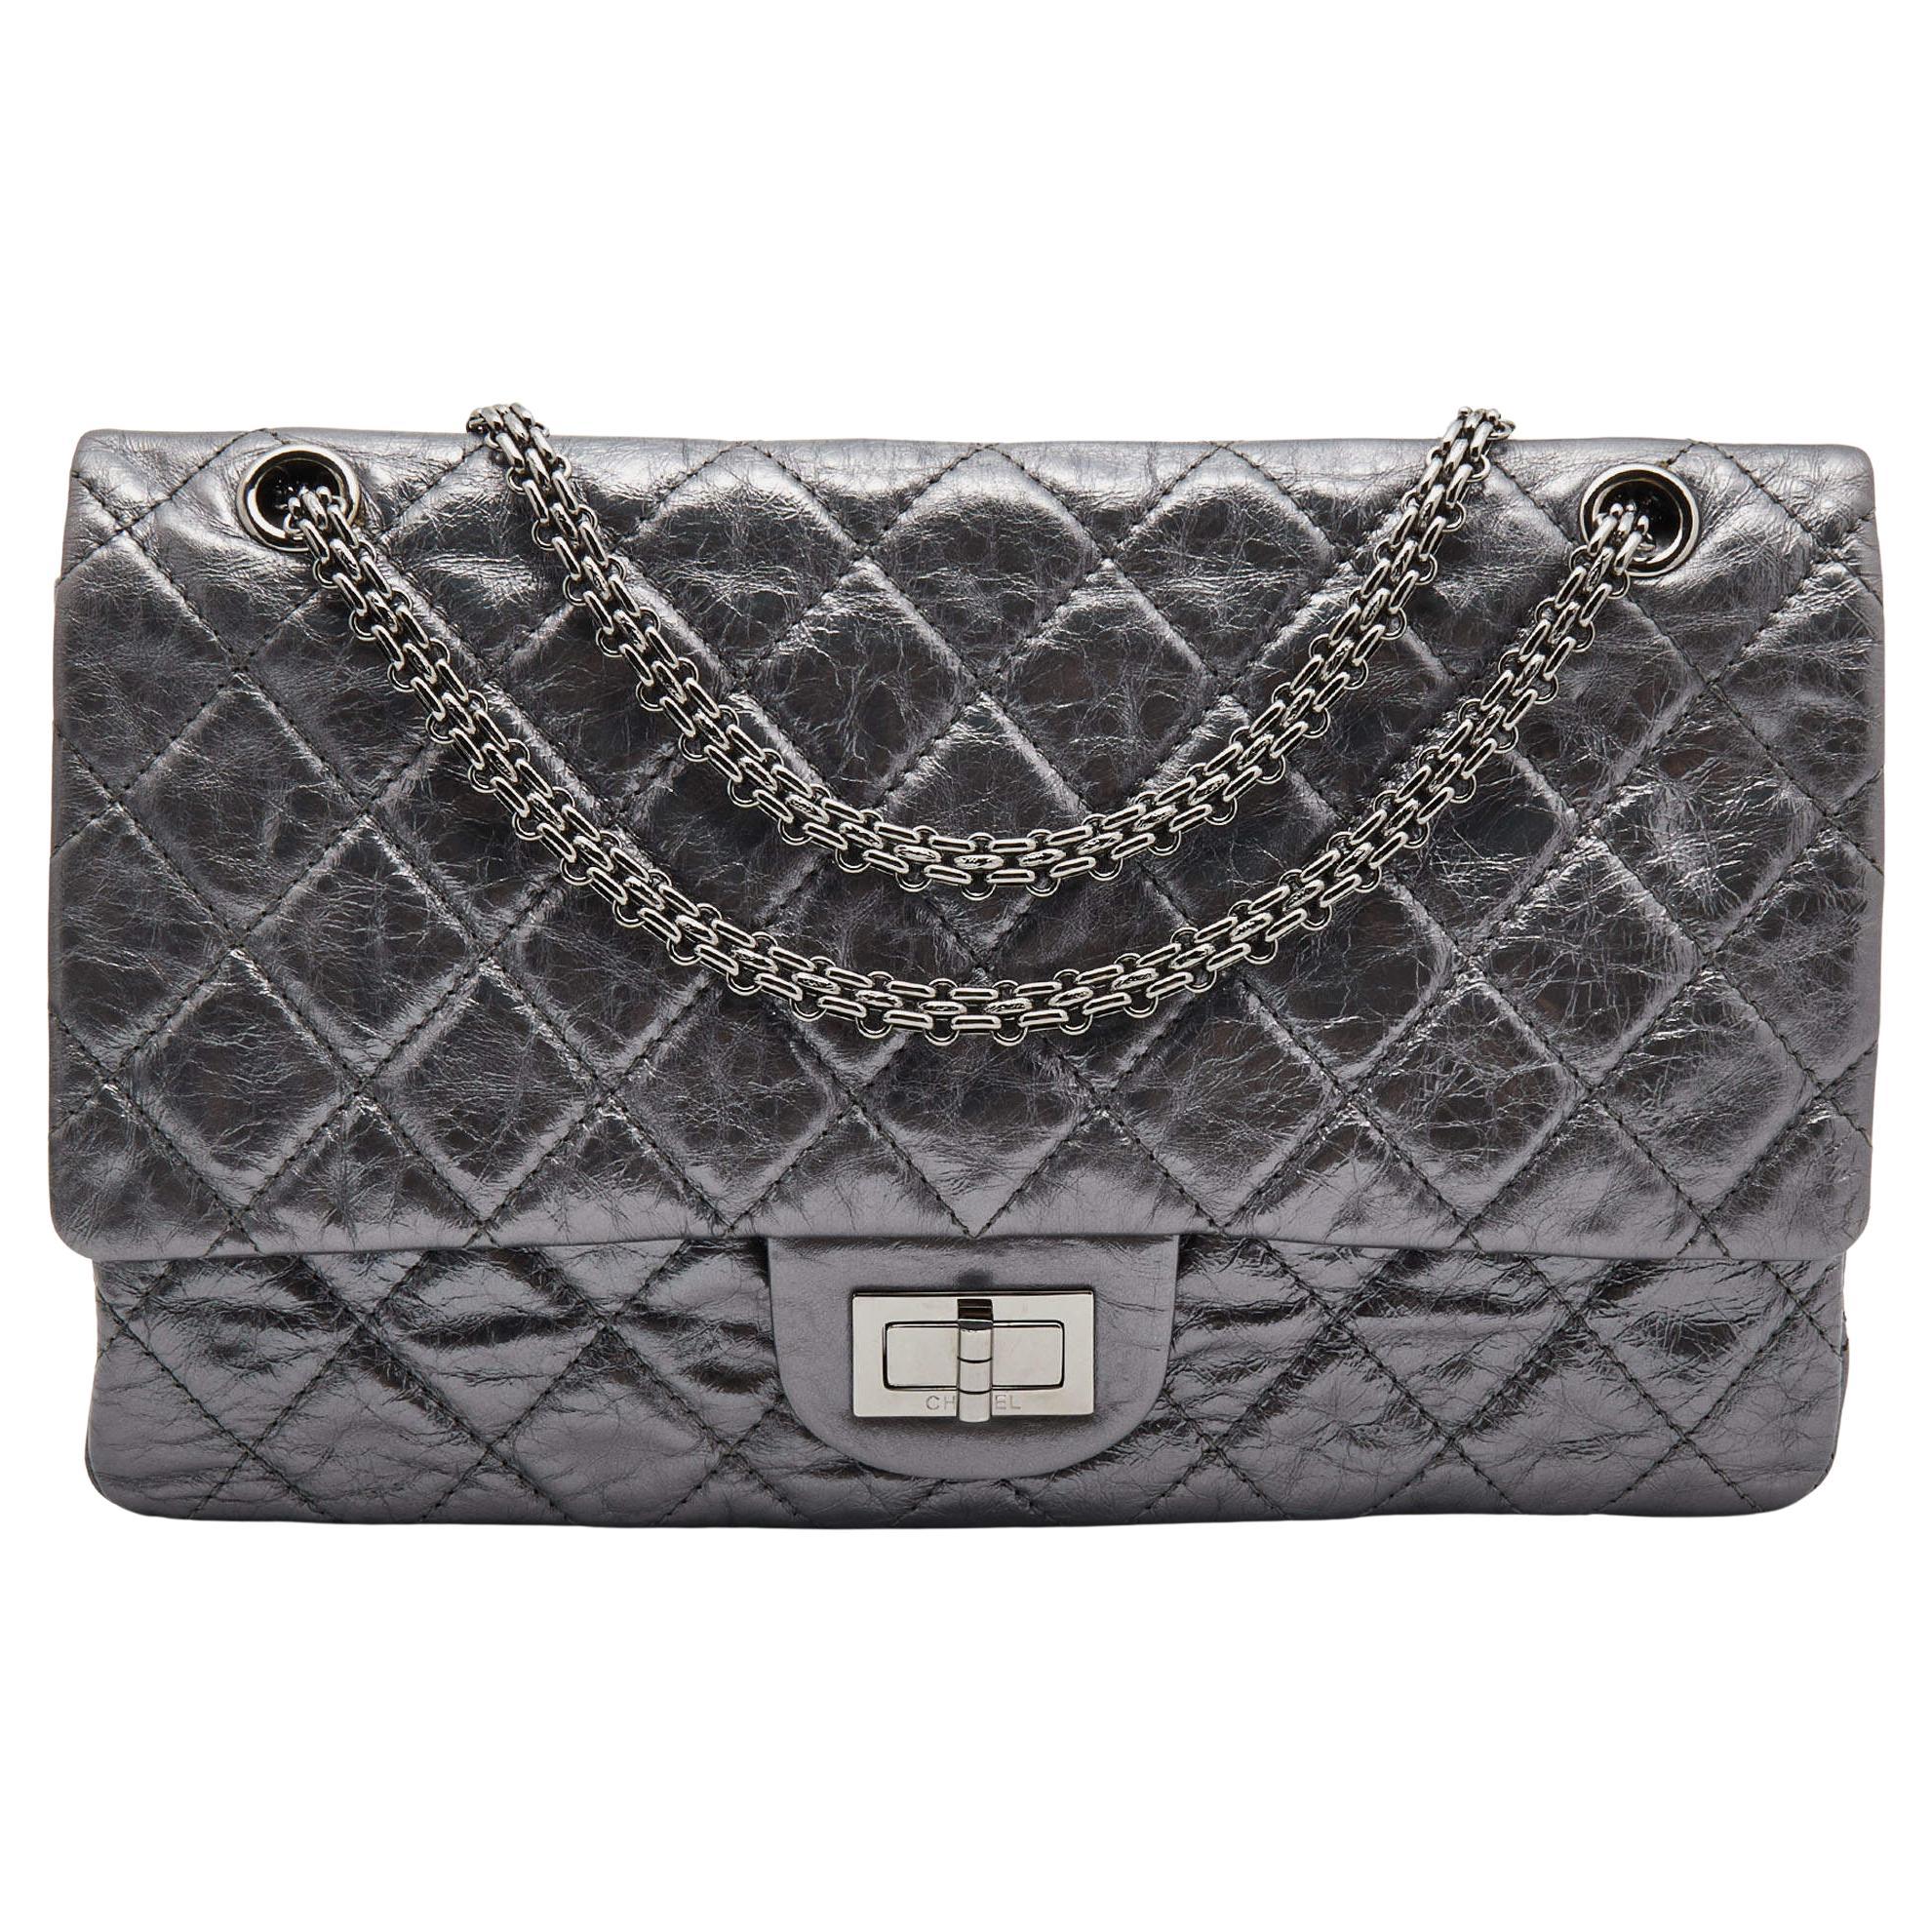 Chanel Metallic Grey Quilted Leather Reissue 2.55 Classic 227 Flap Bag